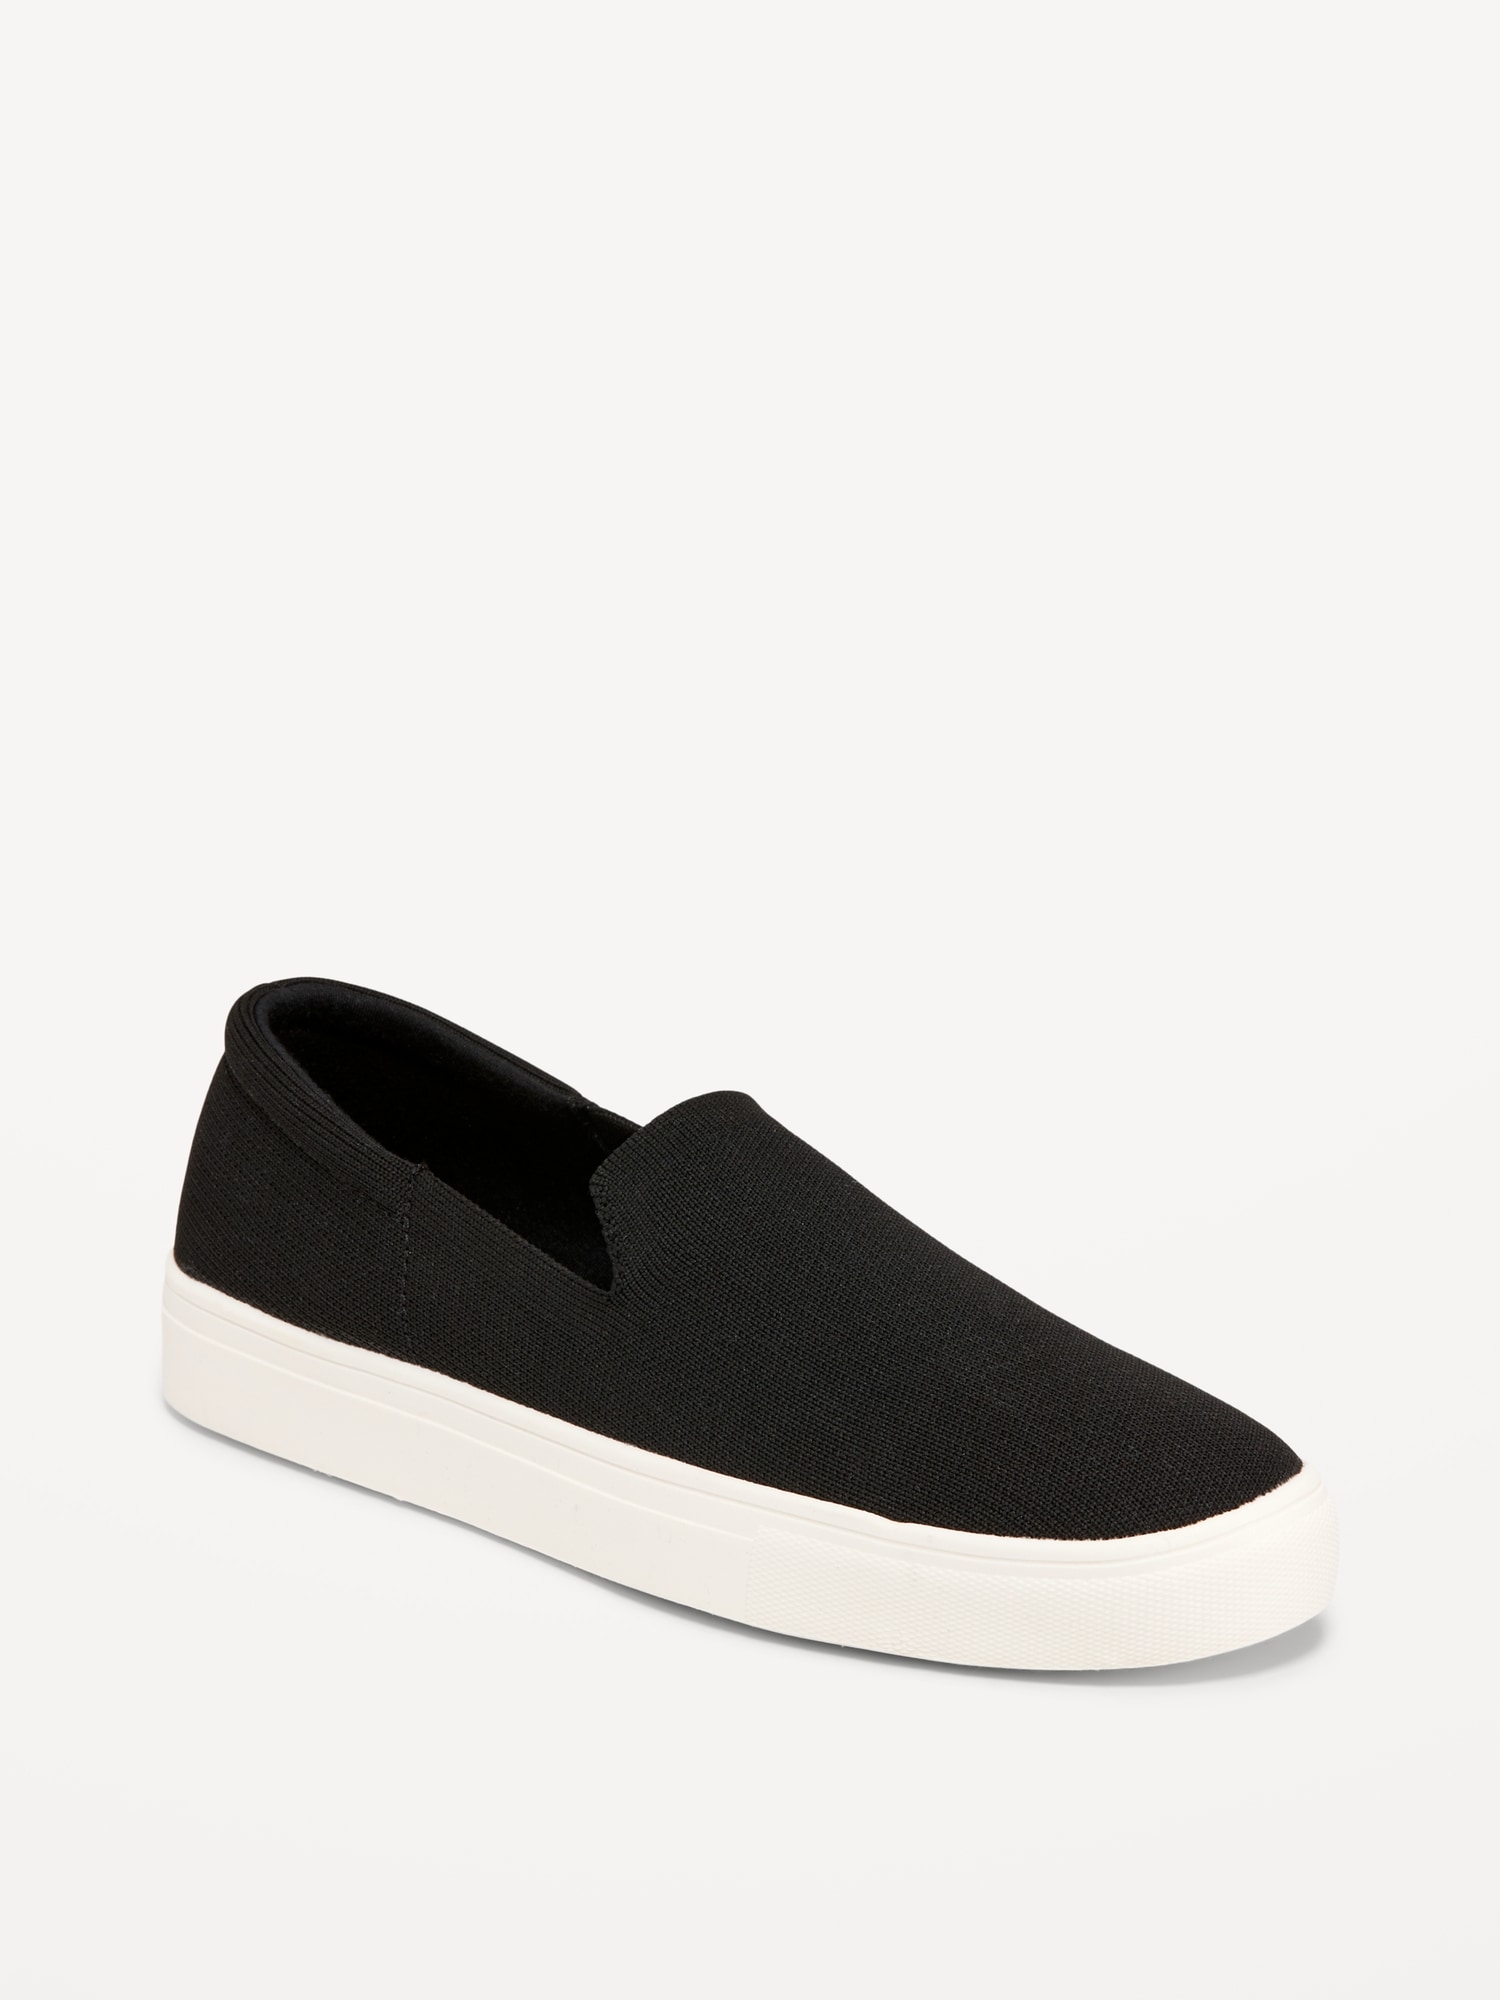 Soft-Knit Slip-On Sneakers for Women | Old Navy